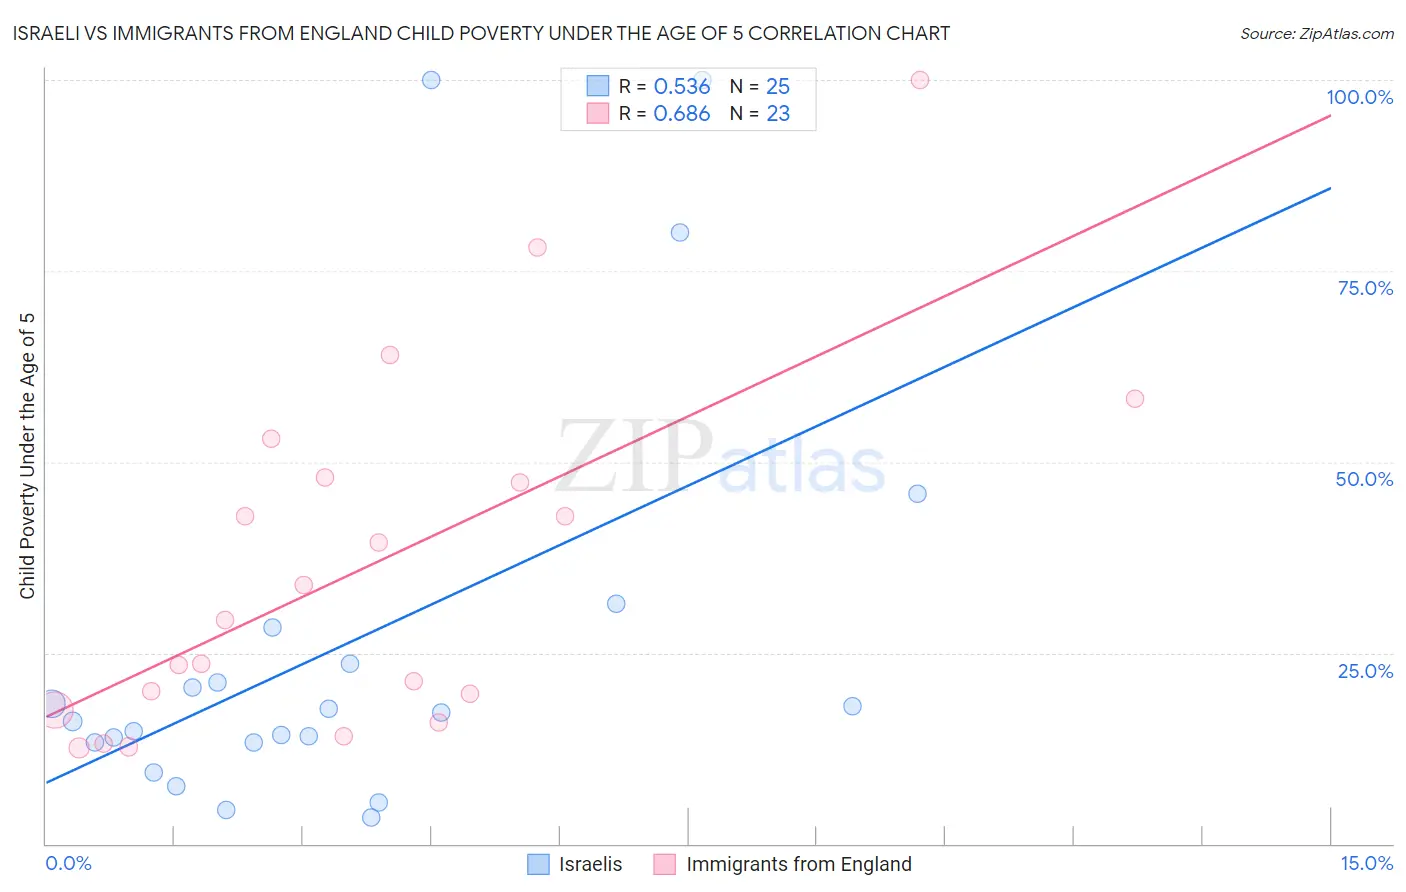 Israeli vs Immigrants from England Child Poverty Under the Age of 5